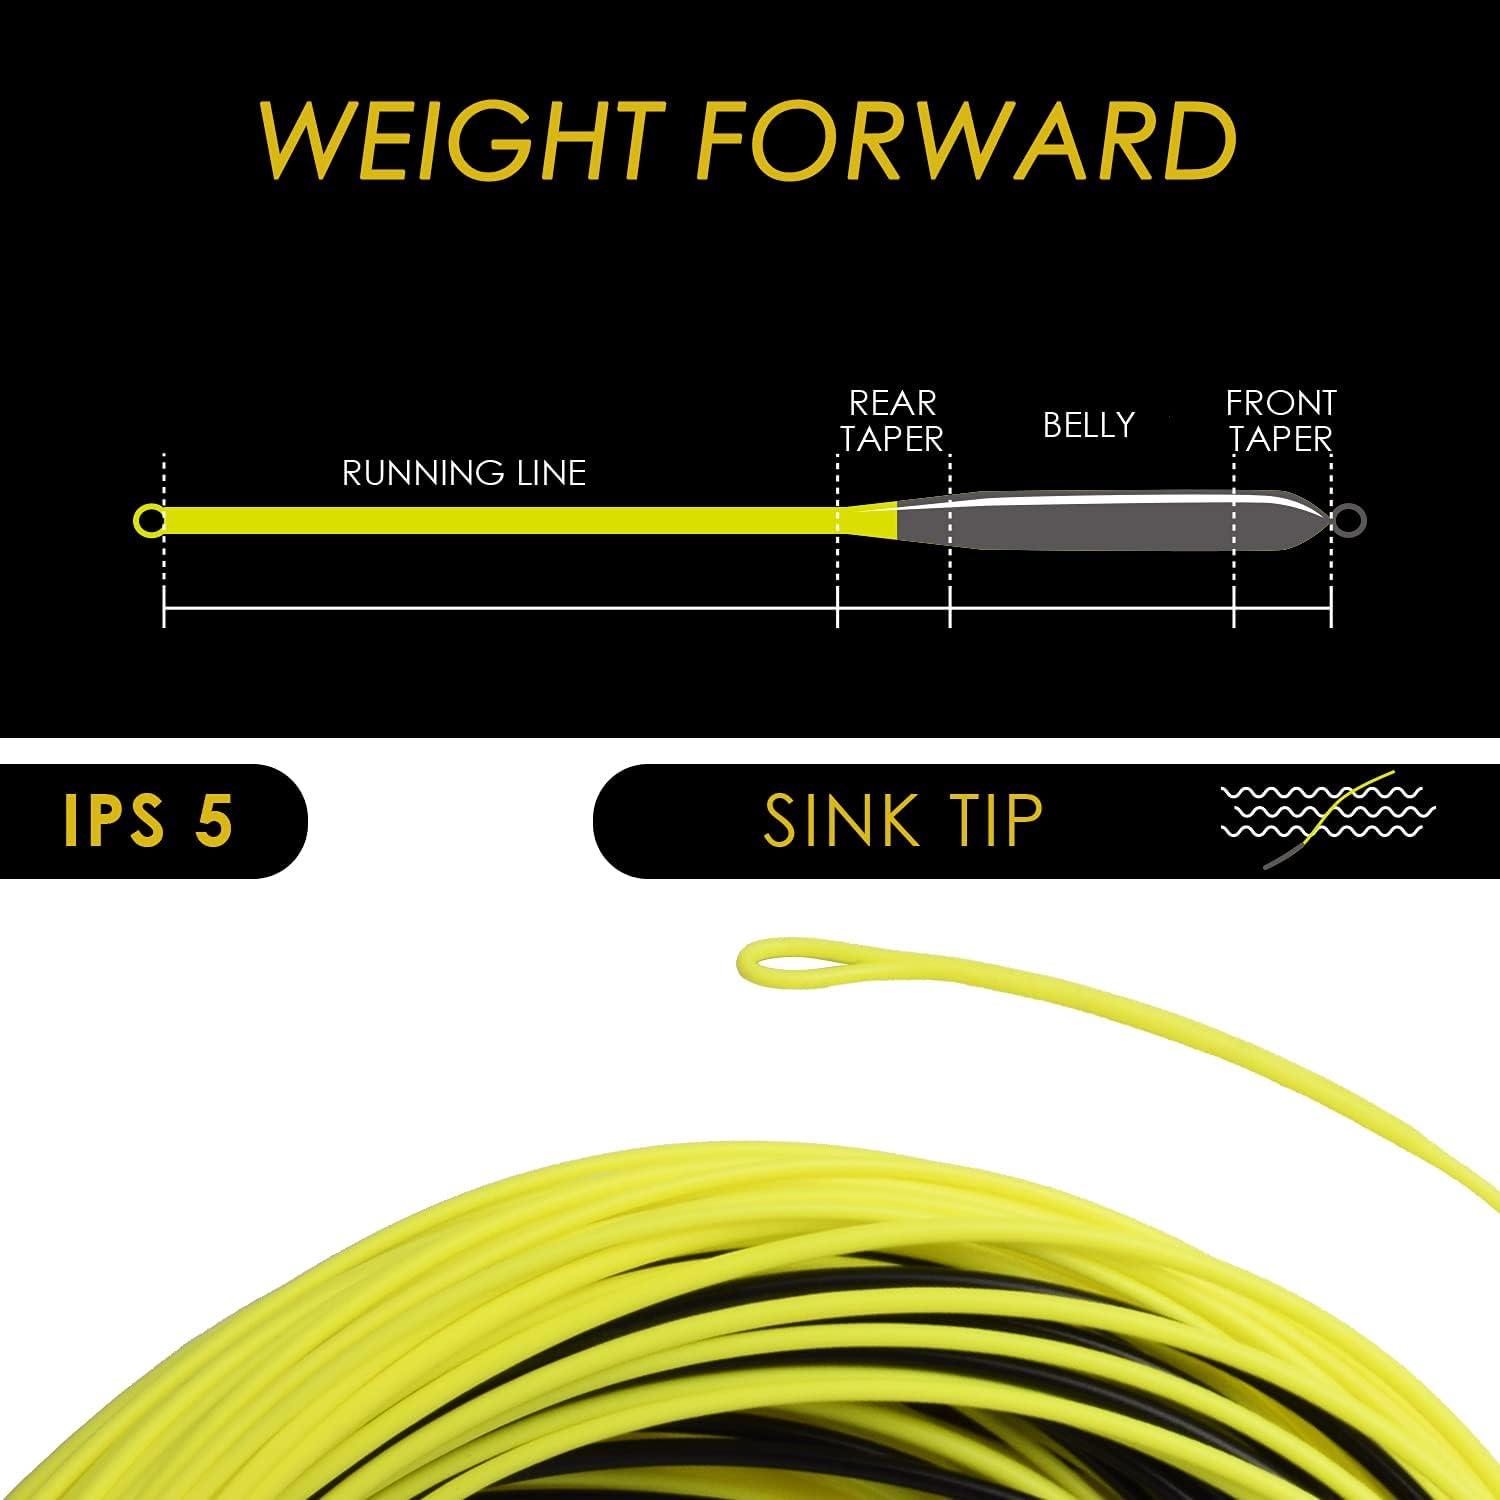 SF Sinking Tip Line Weight Forward Taper Fly Line Fly Fishing Line with  Welded Loop Floating for Freshwater WF 4 5 6 7 8 9 10F/S 100FT IPS3/IPS5  Fluor Yellow&Black/Freshwater/Sink Tip WF9F/S-100FT-5IPS